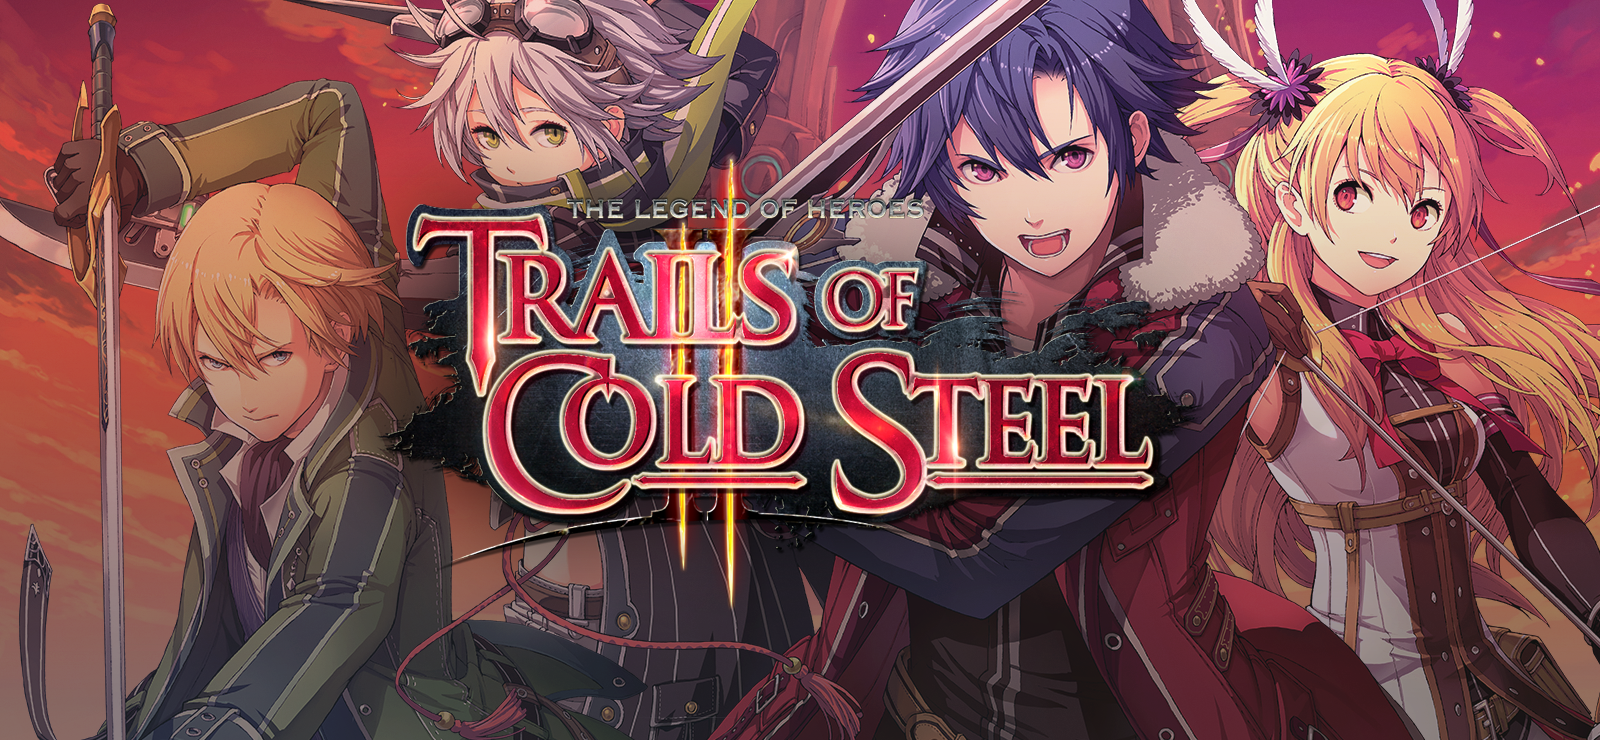 The Legend Of Heroes: Trails Of Cold Steel II - Shining Pom Bait Value Set 1